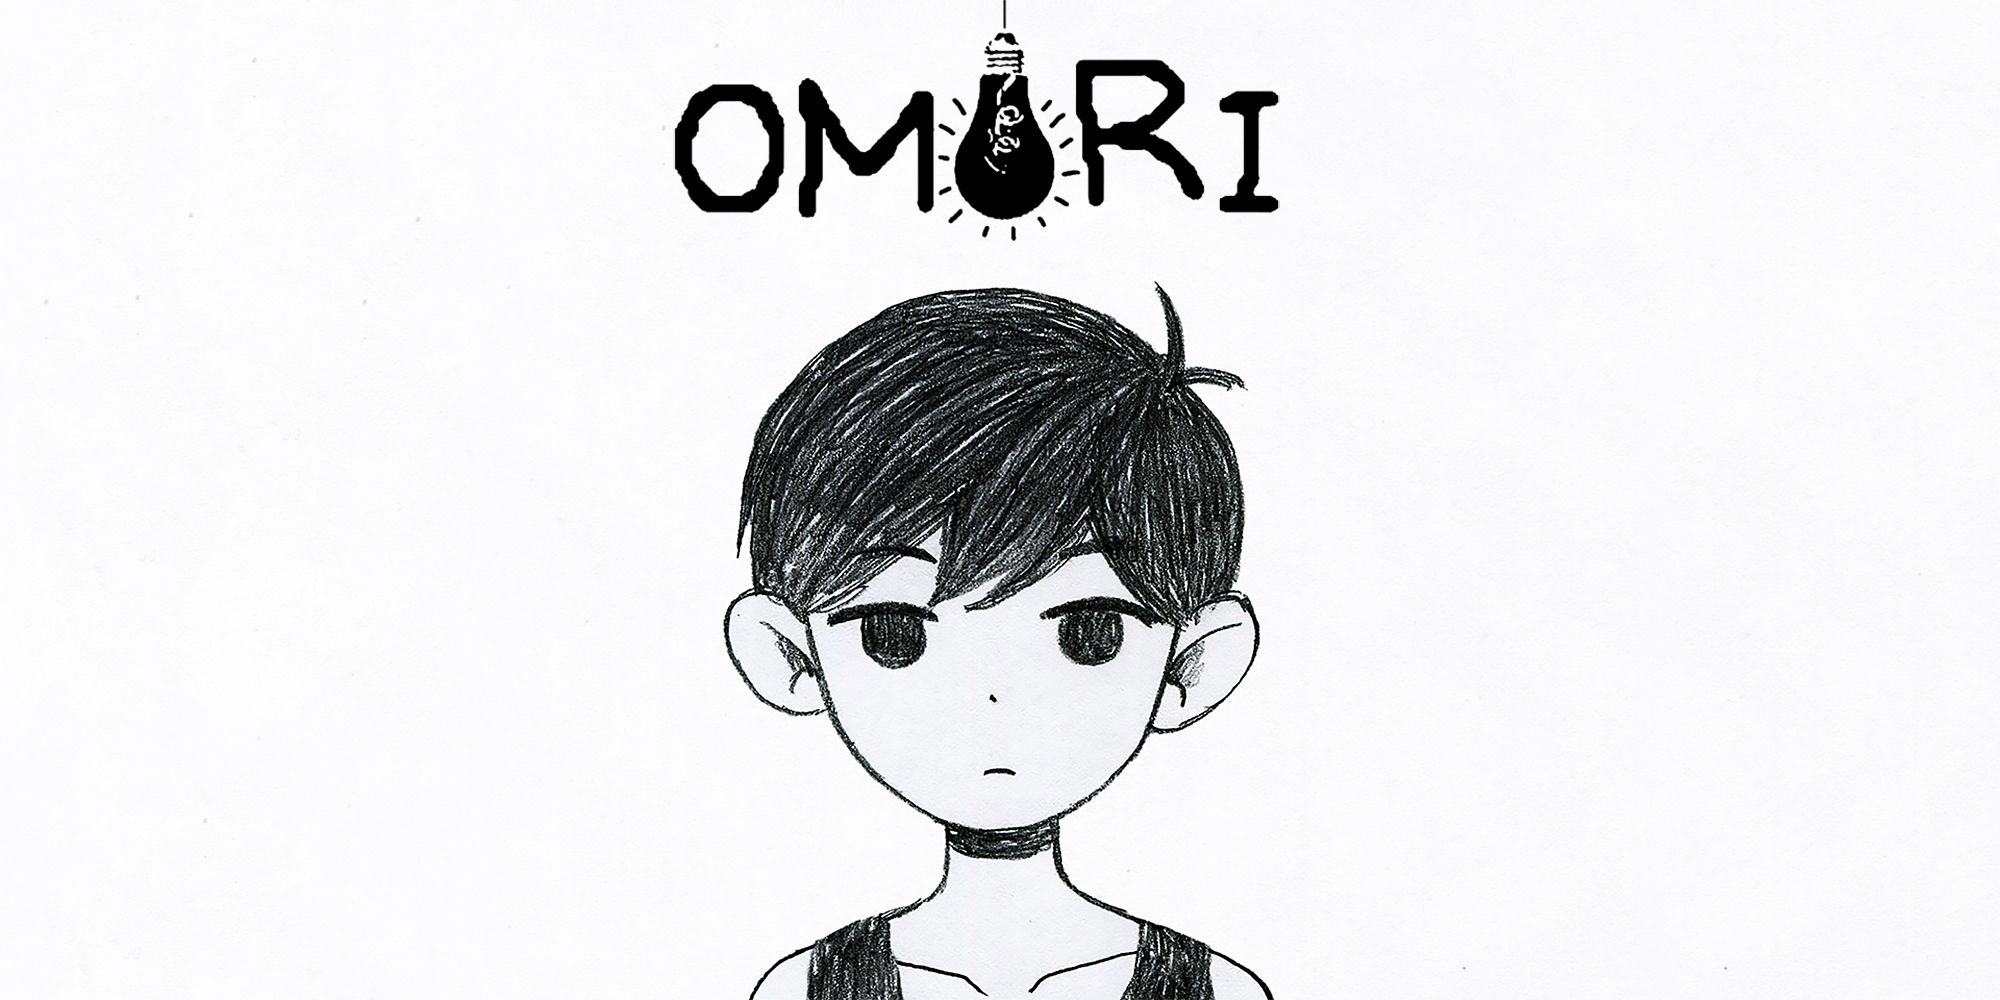 Young people love the amusing game Omori